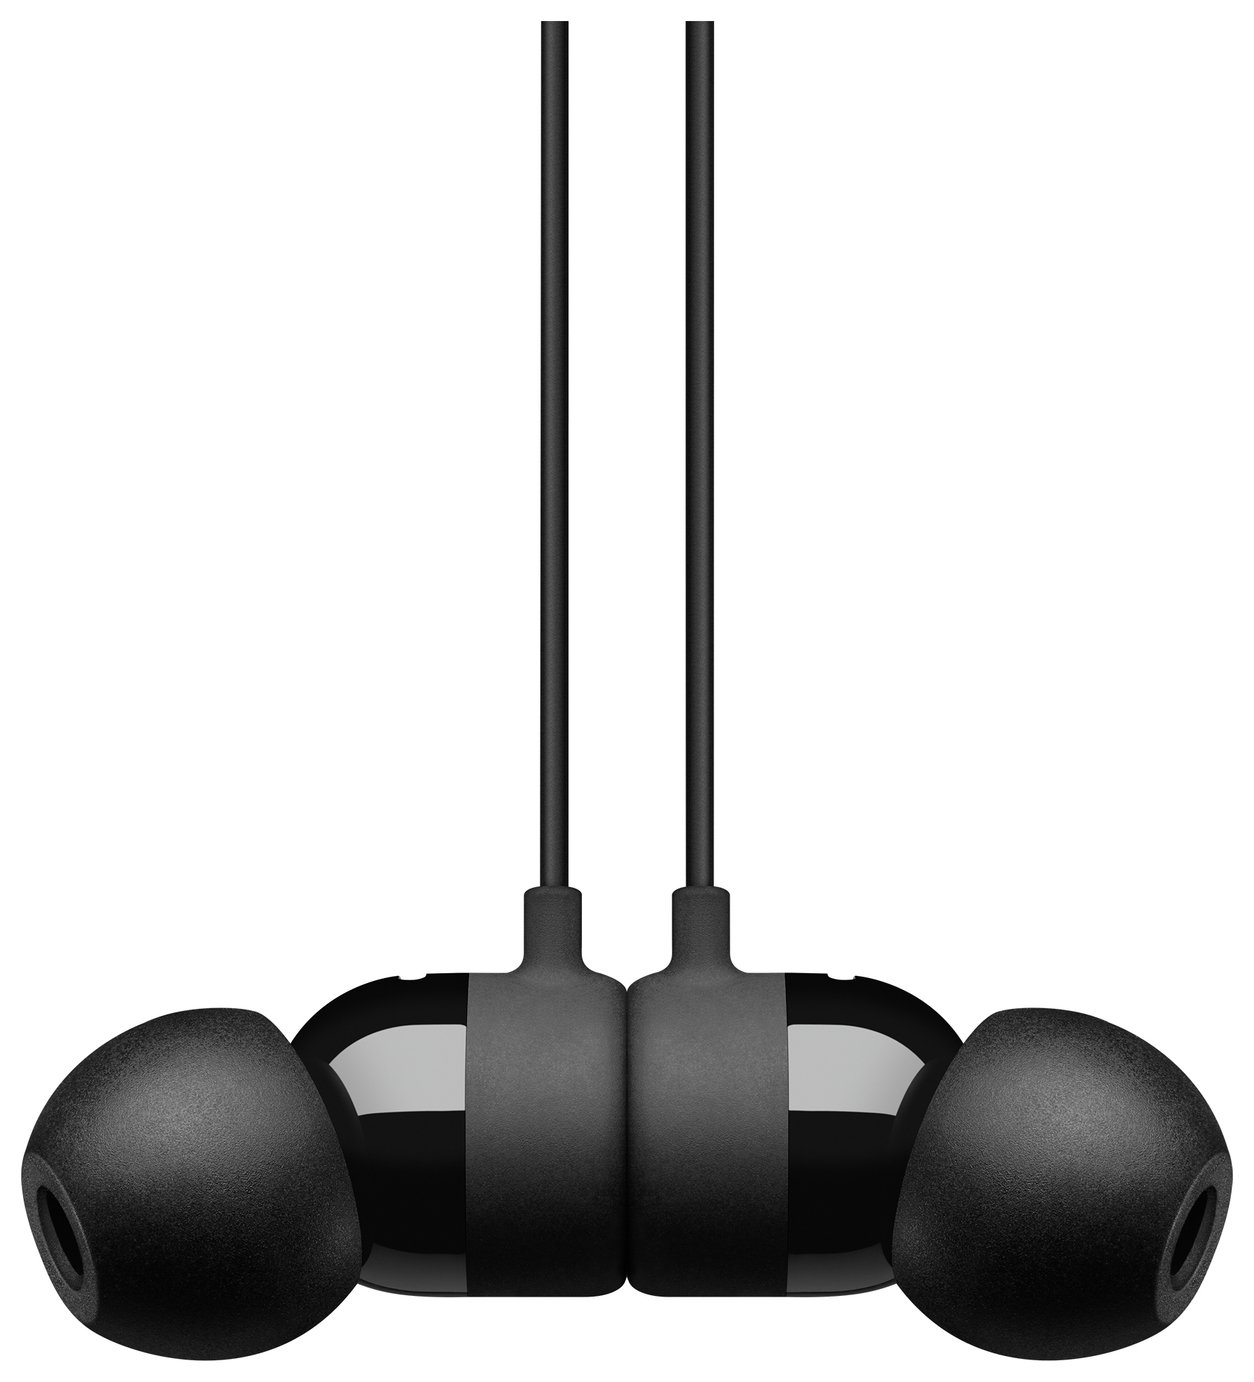 urBeats3 In-Ear Earphones with Lightning Connector Review